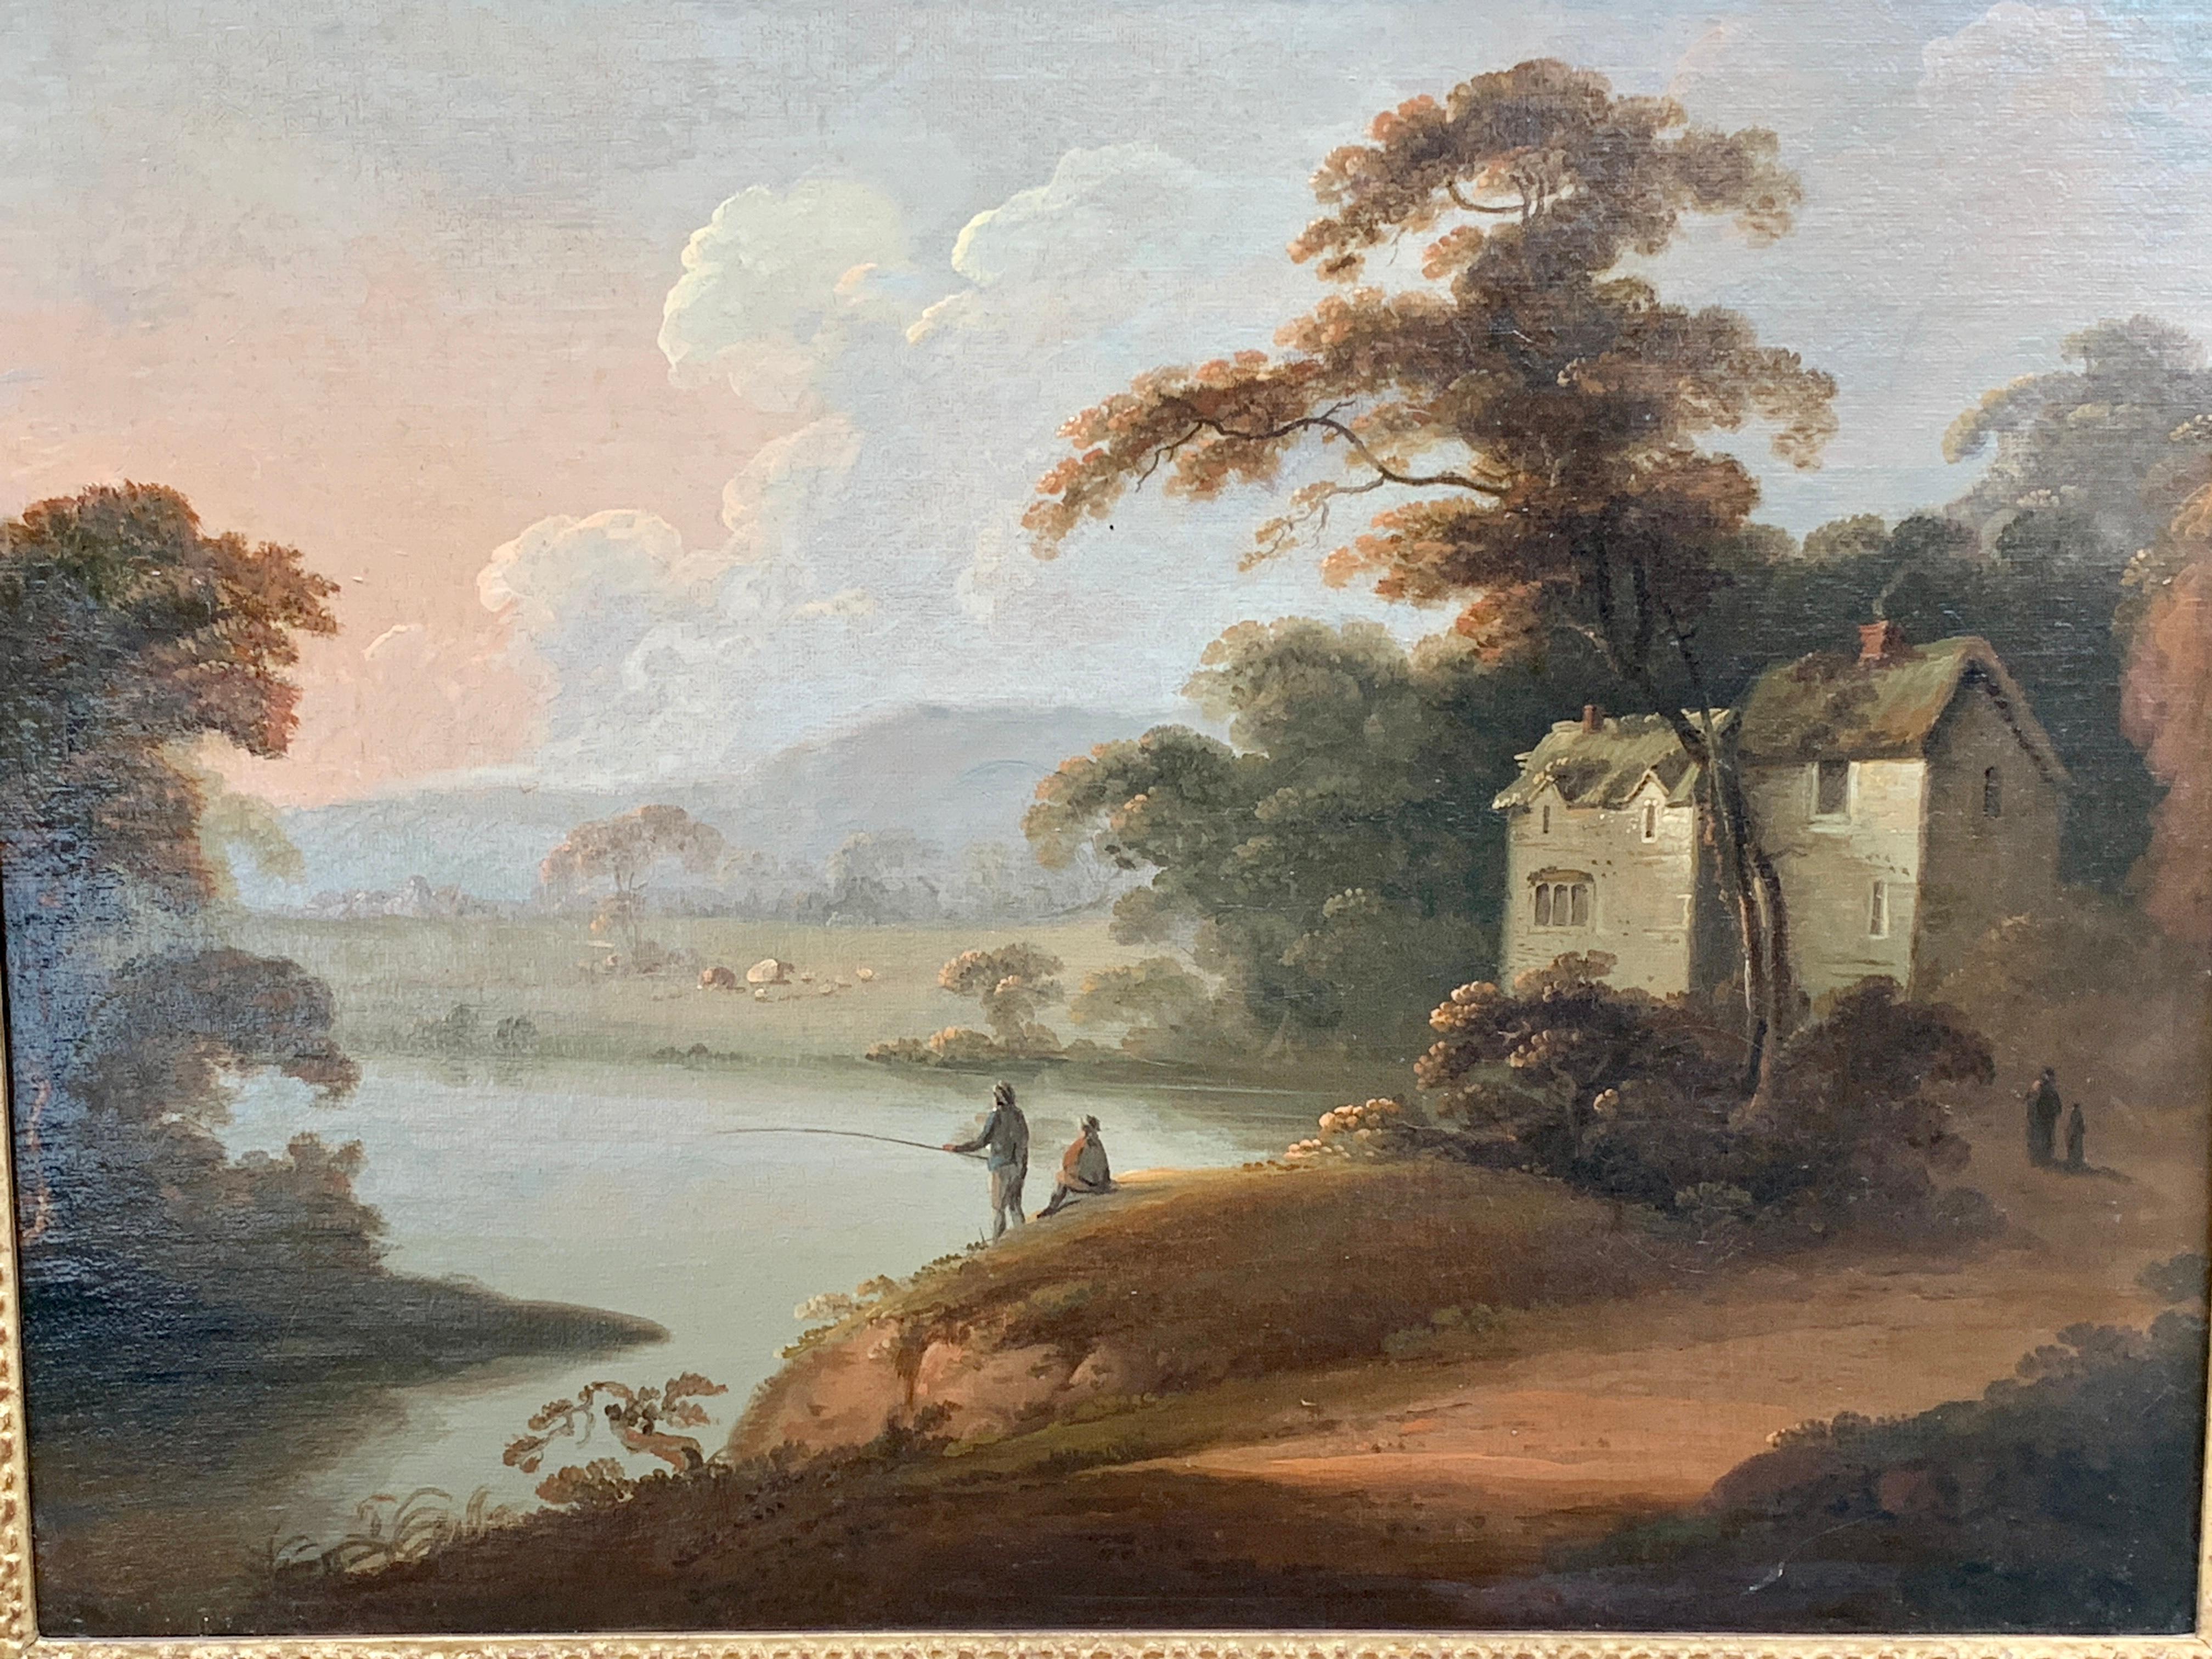  18th century English oil landscape with figures fishing by an English House - Painting by John Rathbone